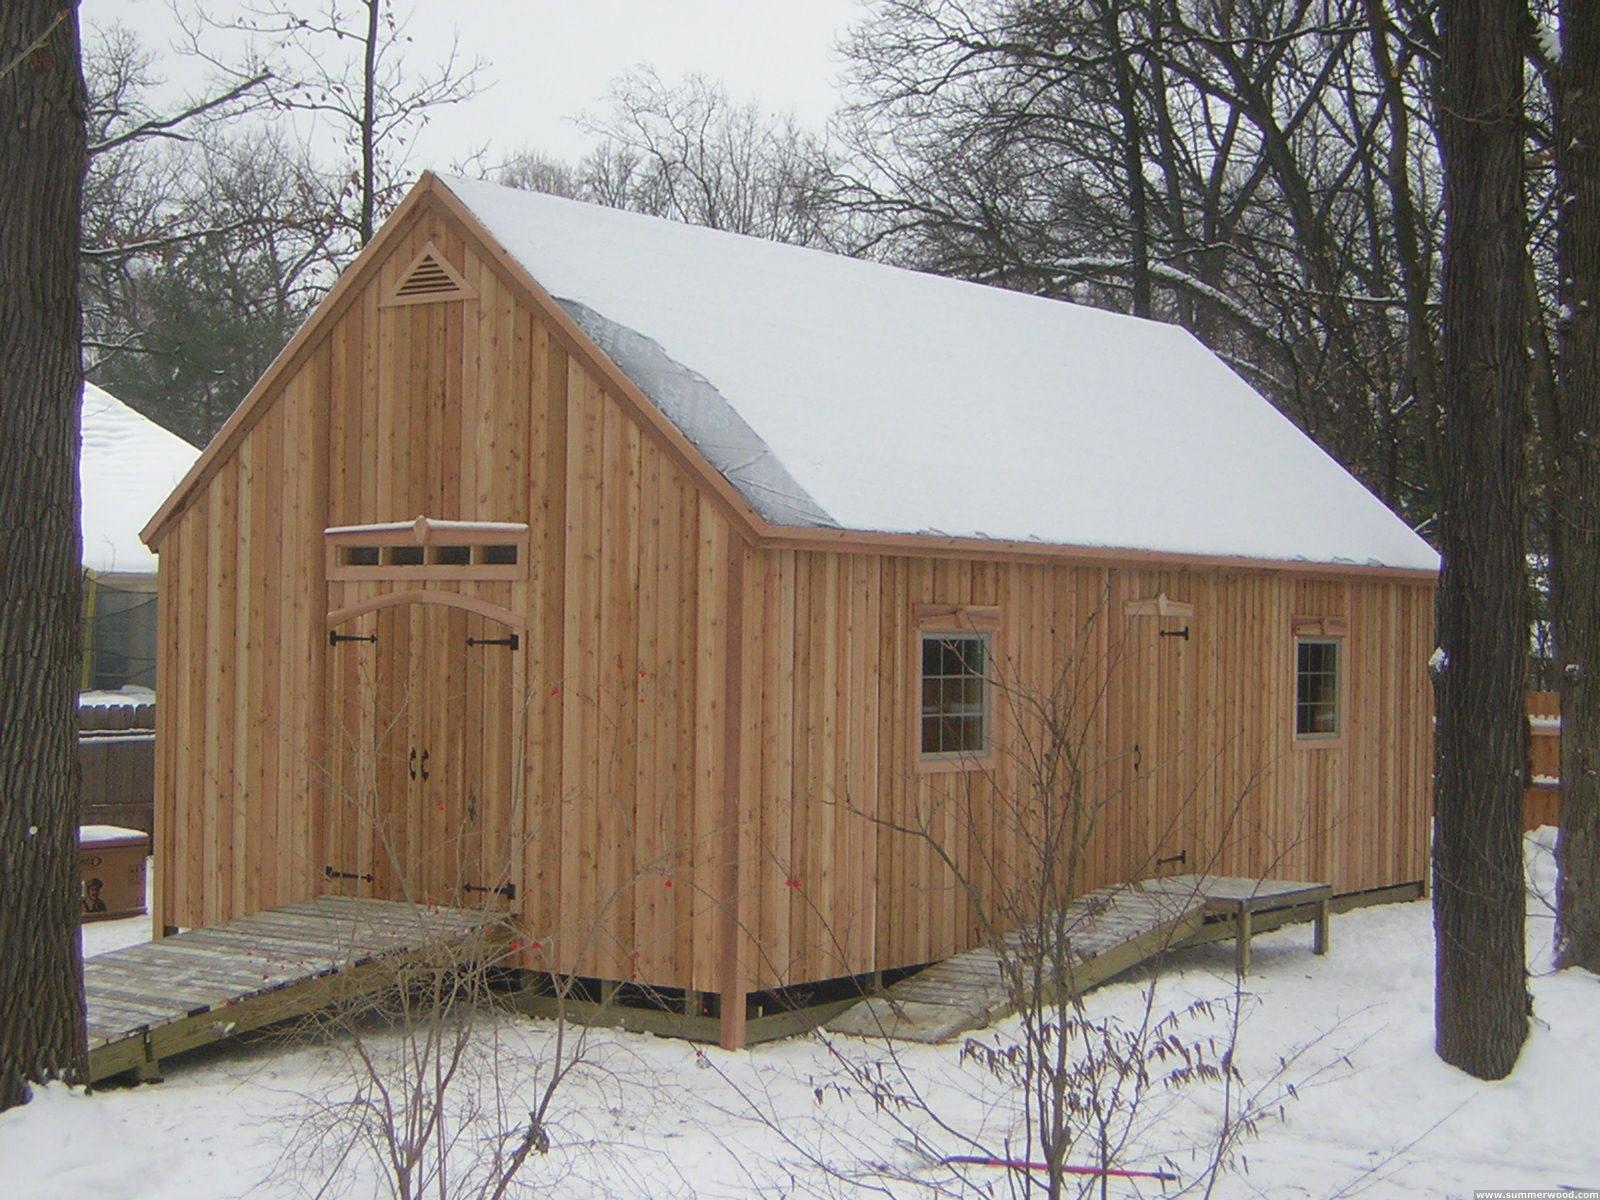 Custom Telluride Shed 12 x 24 with rough cedar siding in Lake Forest Illinois. ID number 8326